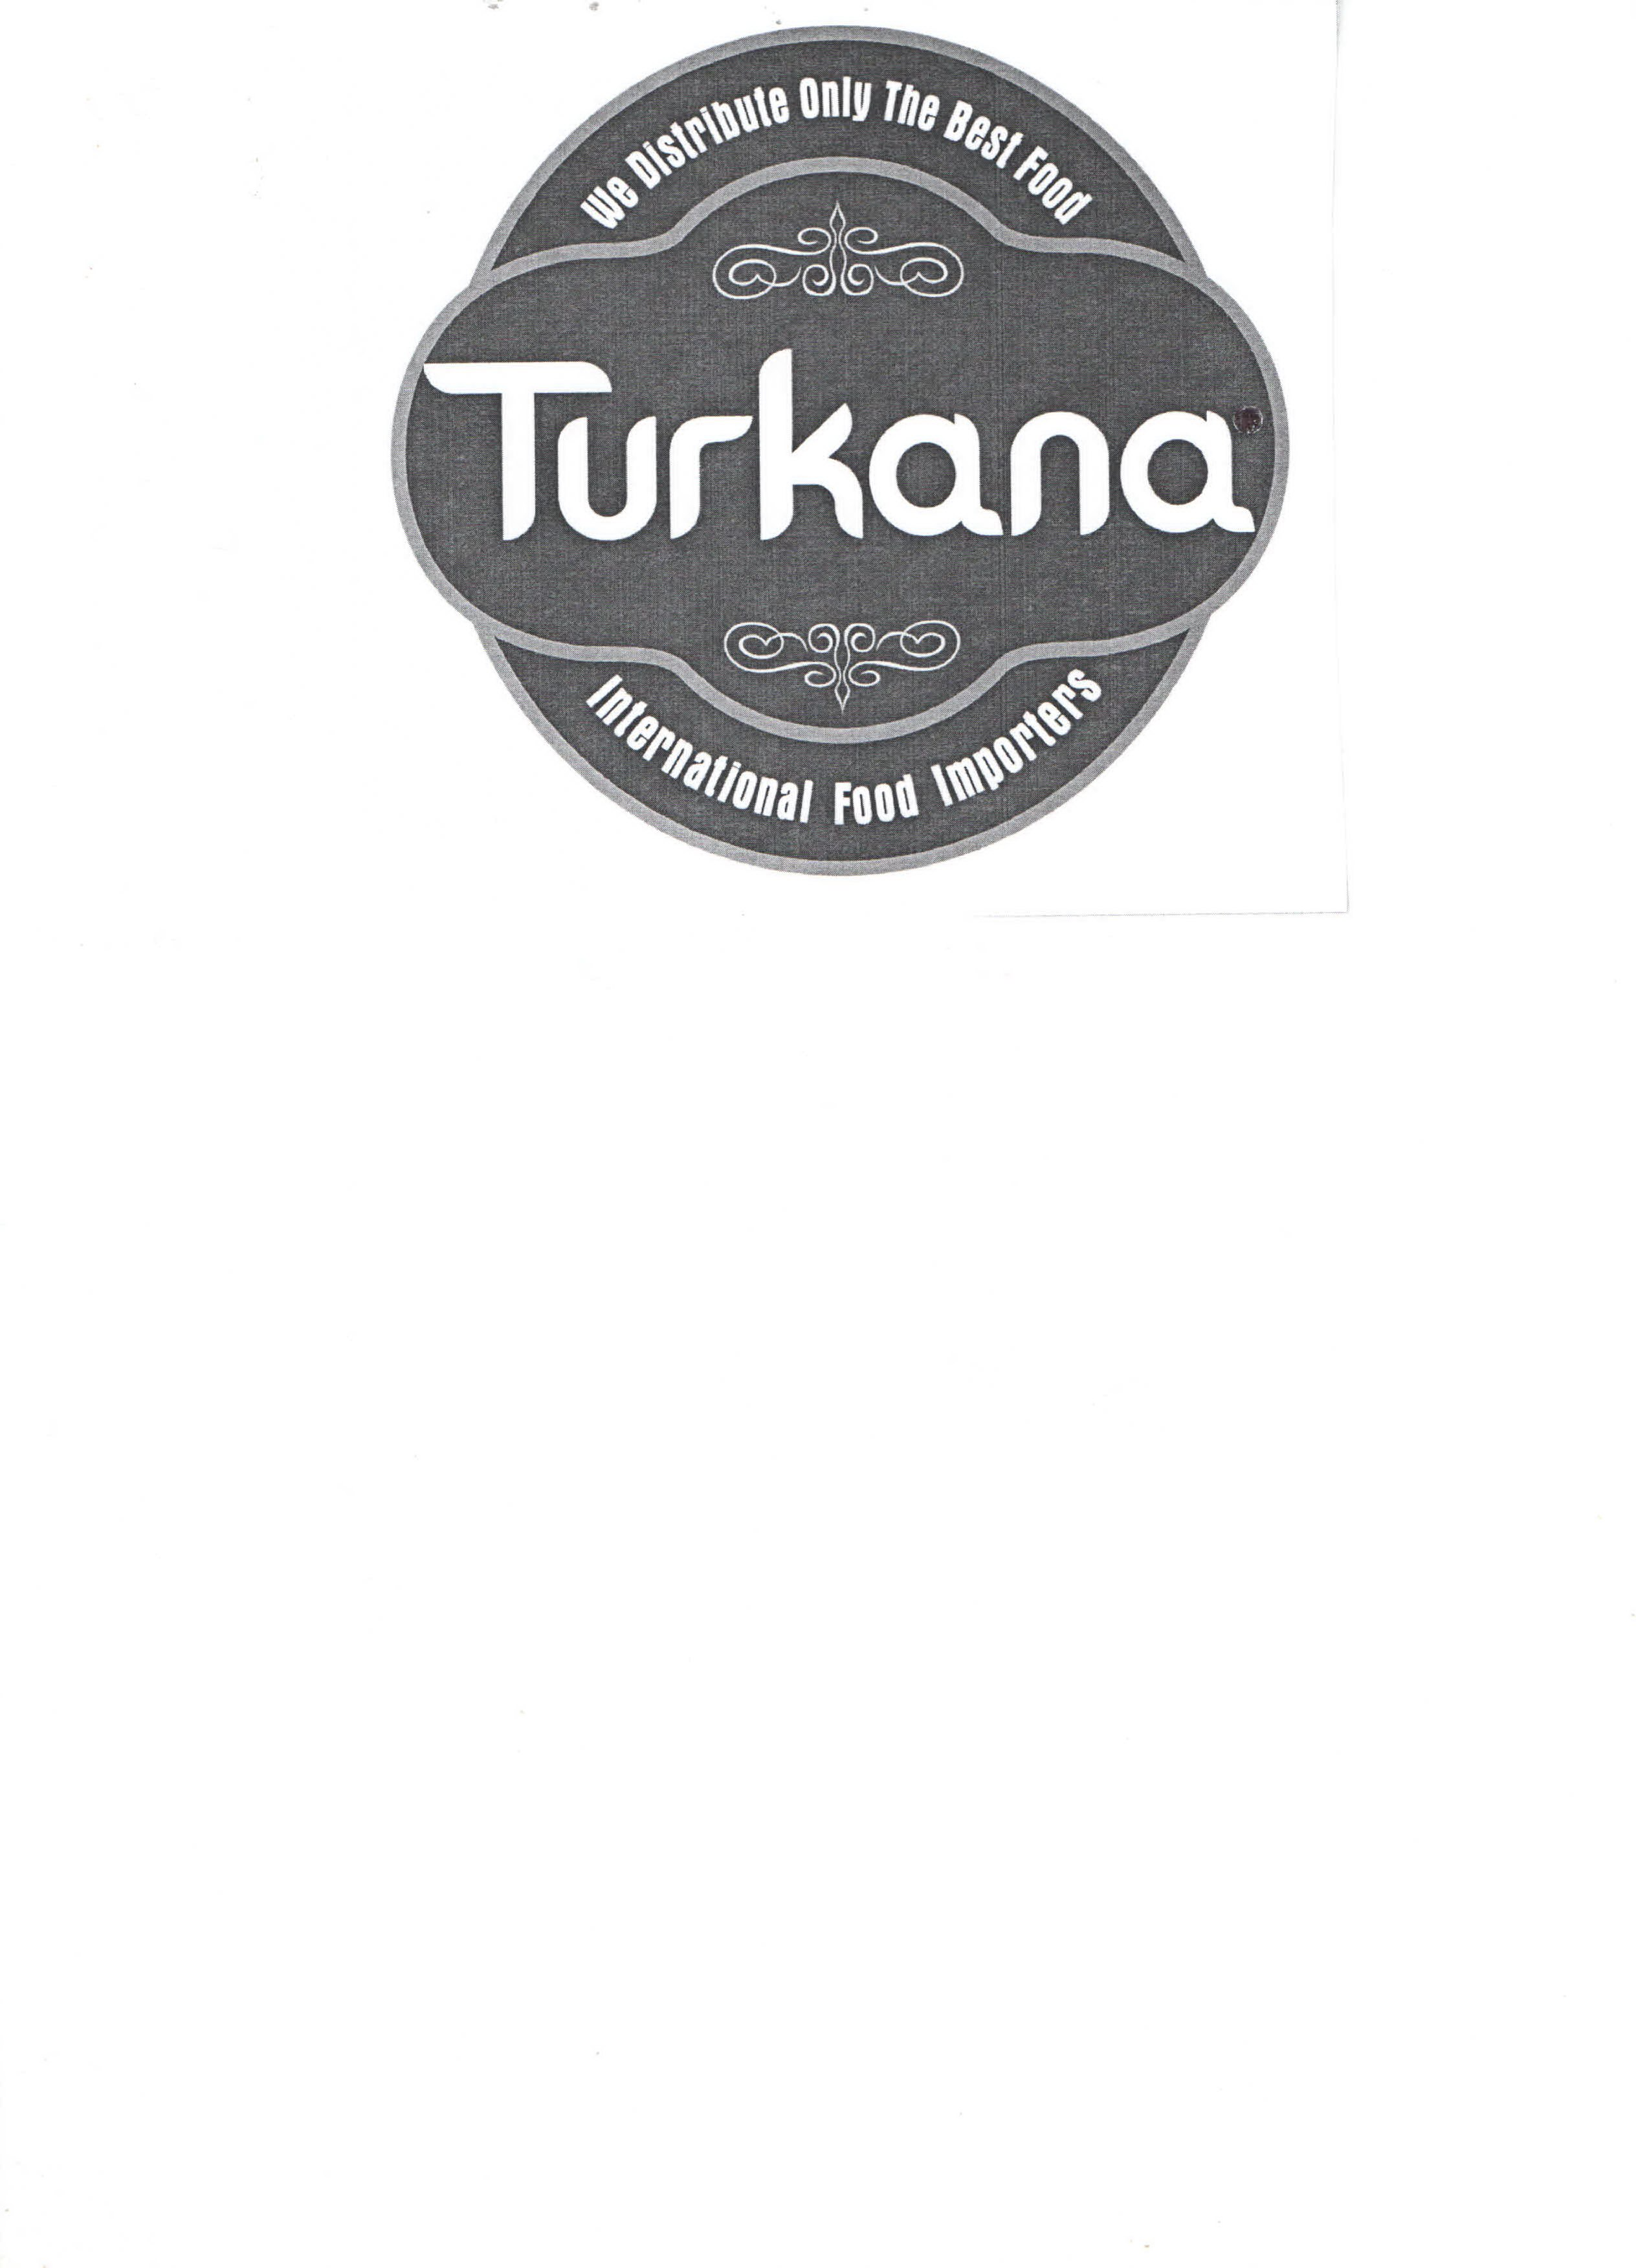  WE DISTRIBUTE ONLY THE BEST FOOD TURKANA INTERNATIONAL FOOD IMPORTERS